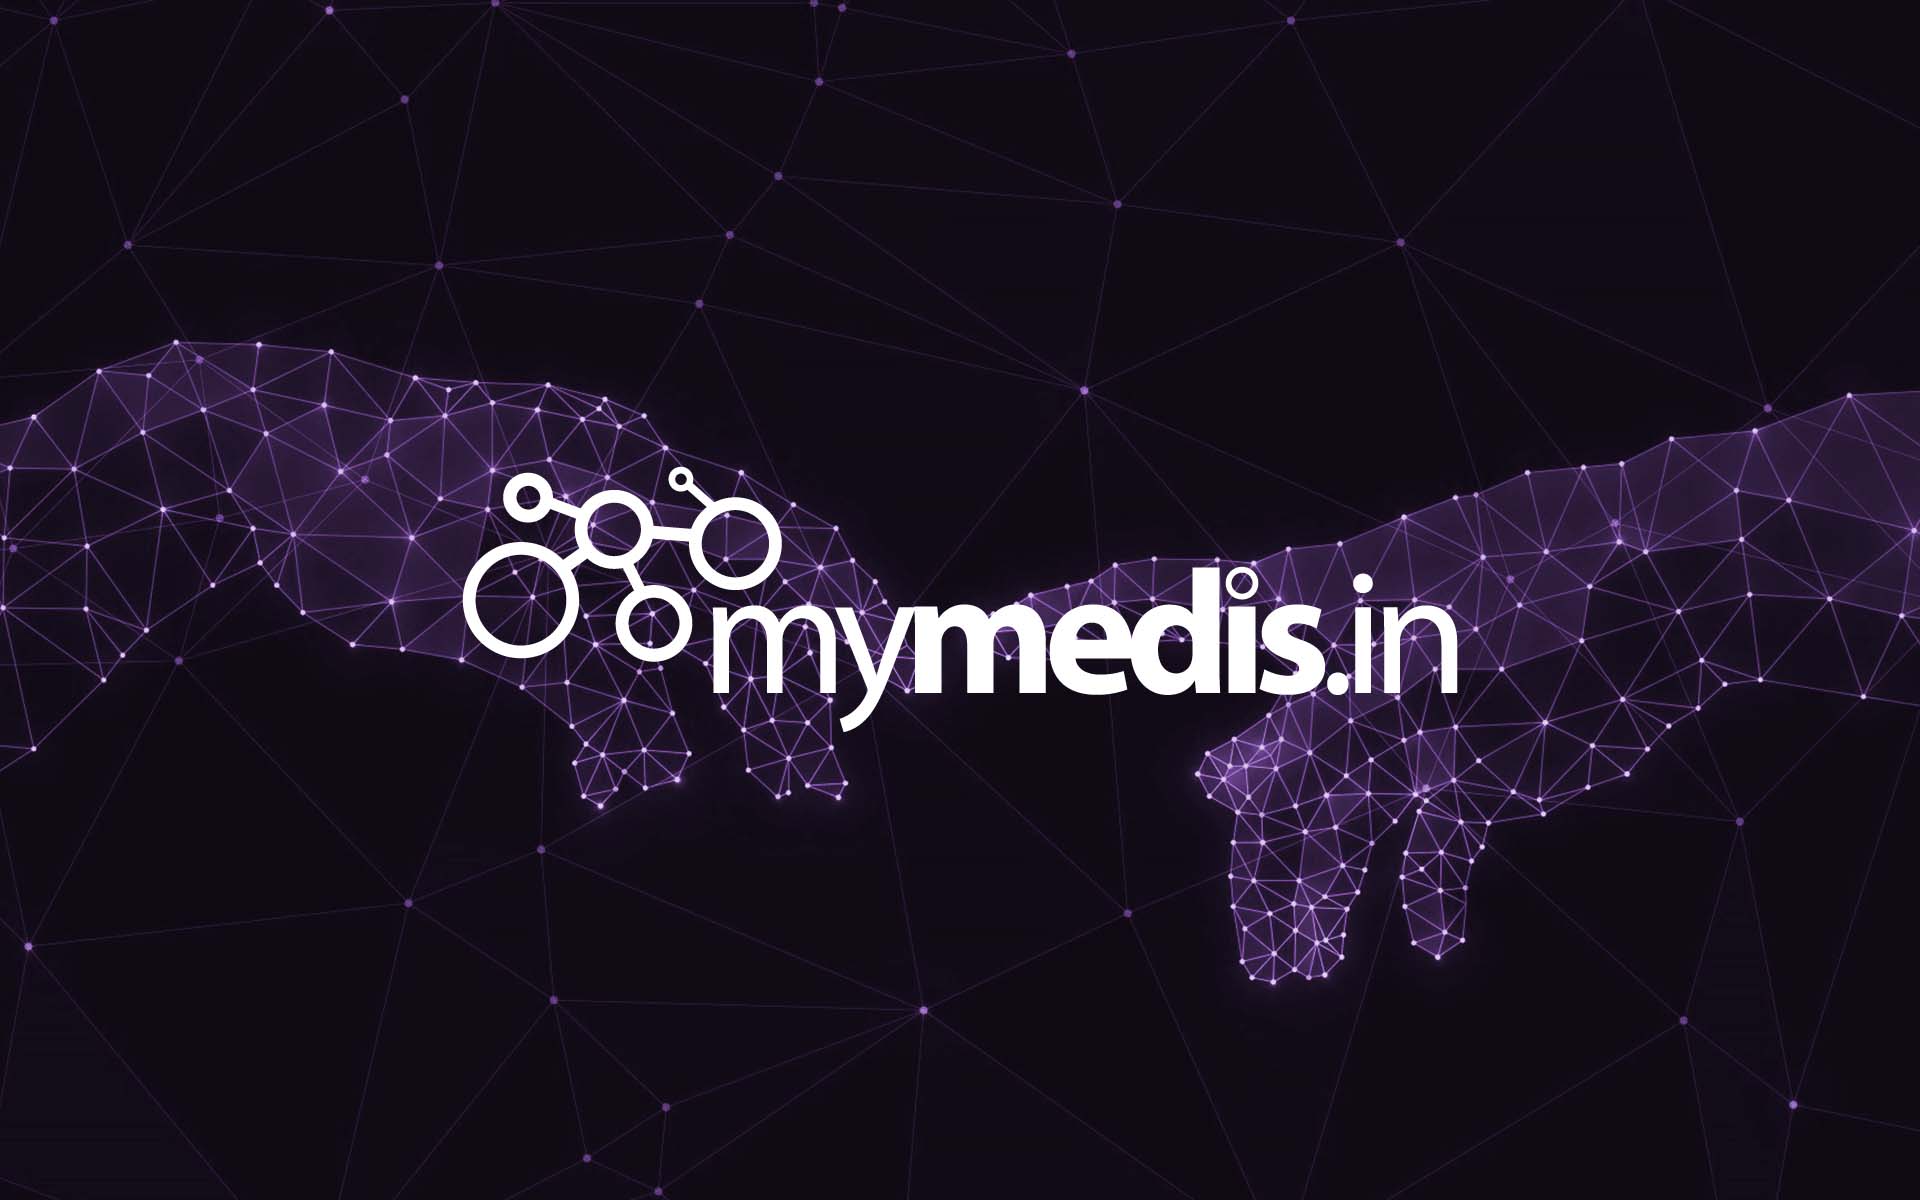 MyMEDIS Readies For ICO Launch – Creates A New Paradigm In The Healthcare Industry Using Blockchain Technology Creating a Patient-Centric Model For Health Care Payments and Data Storage